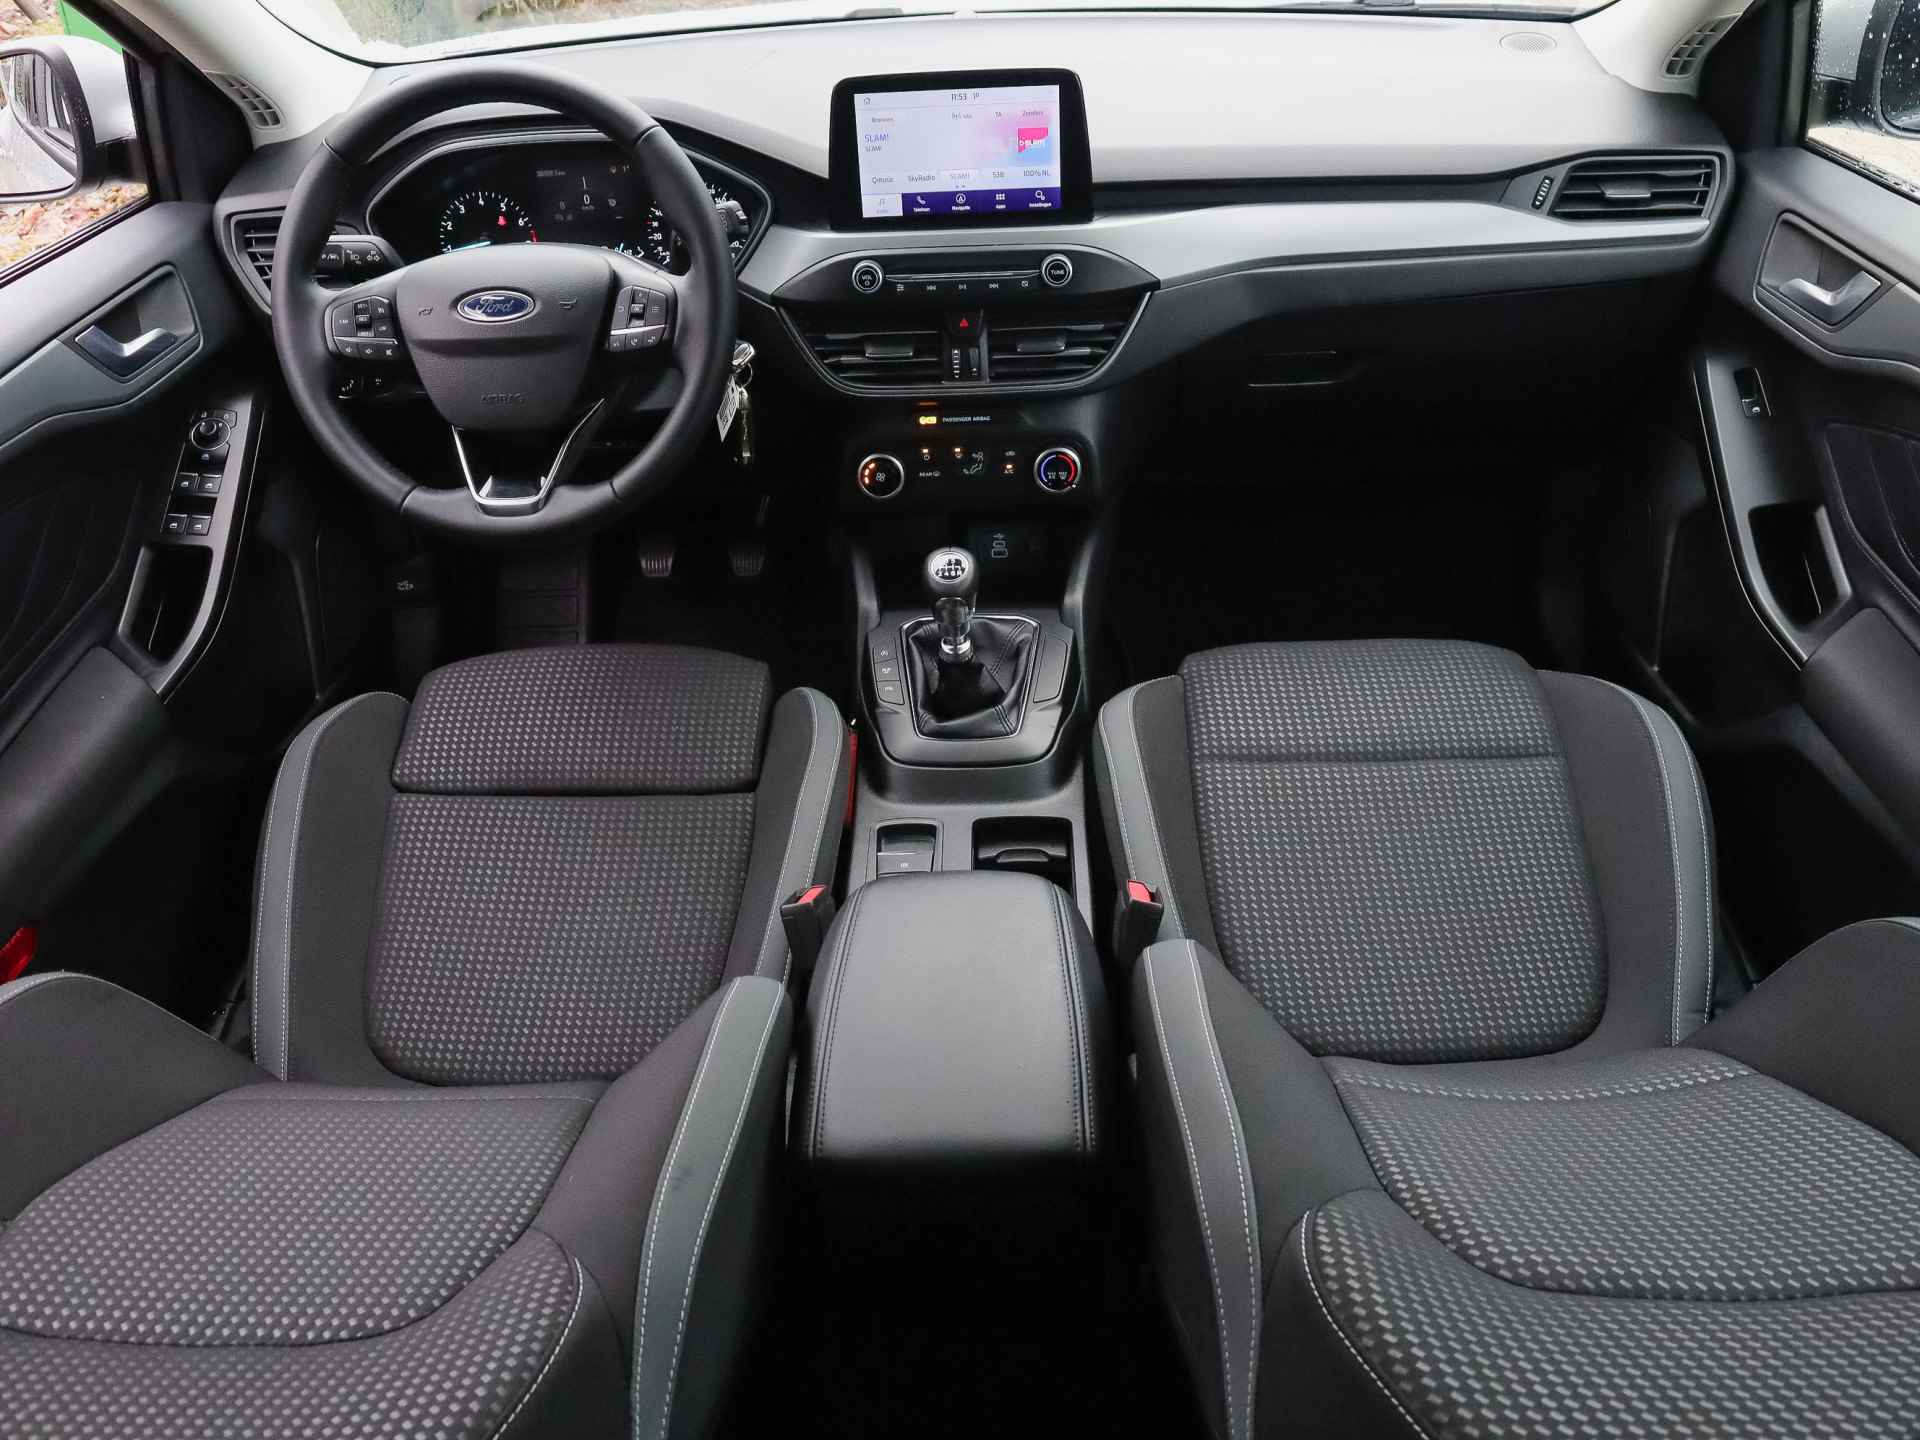 Ford Focus 1.0i Hybrid Connected, (149PK) 1e-Eig, Ford-Dealer-Onderh, 12-Mnd-BOVAG, NL-Auto, Navigatie/Apple-Carplay/Android-Auto, Parkeersensoren-V+A, Cruise-Control, Airco, DAB, Lane-Assist, Privacy-Glas, Sportstoelen, Led-Koplampen, Adaptieve-Cruise-Control - 3/55